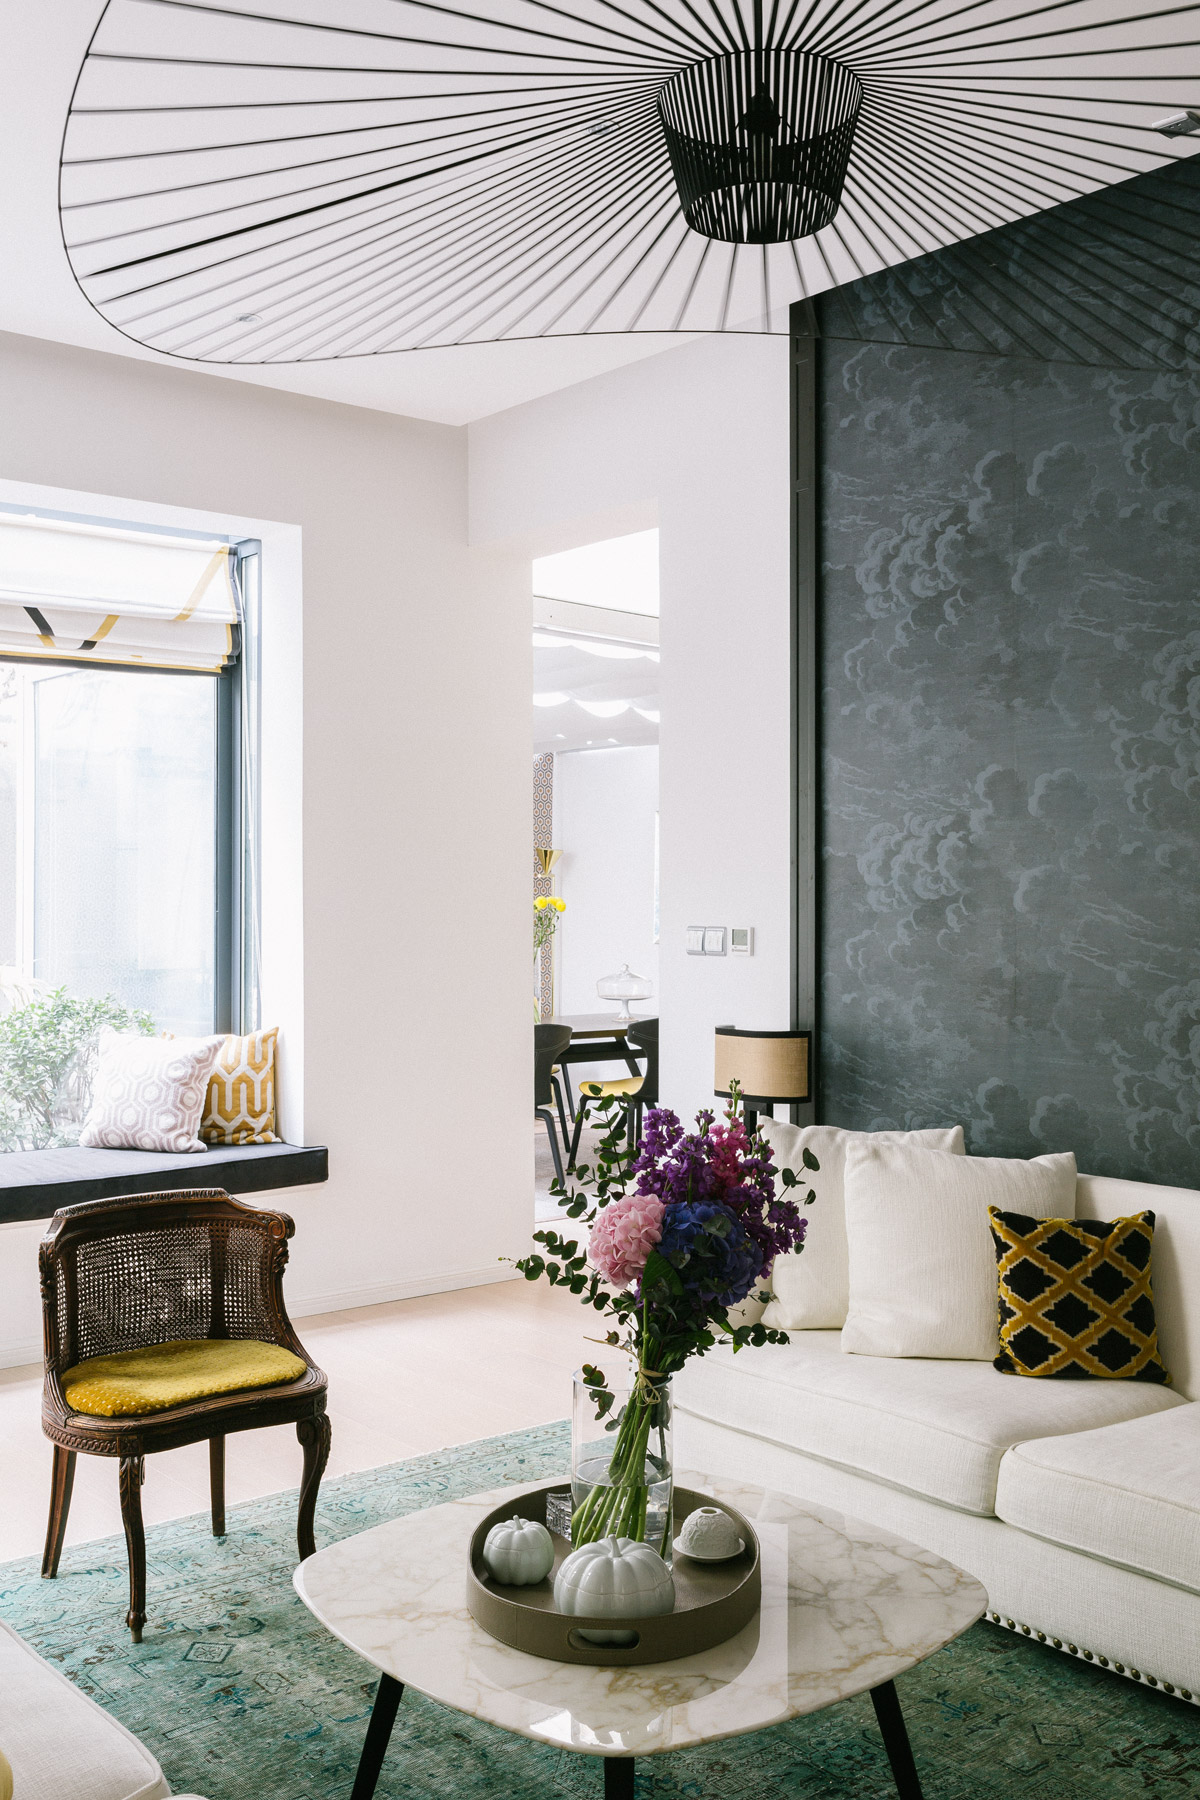 An etiquette school founder’s Shanghai home combines old world glamour with contemporary art